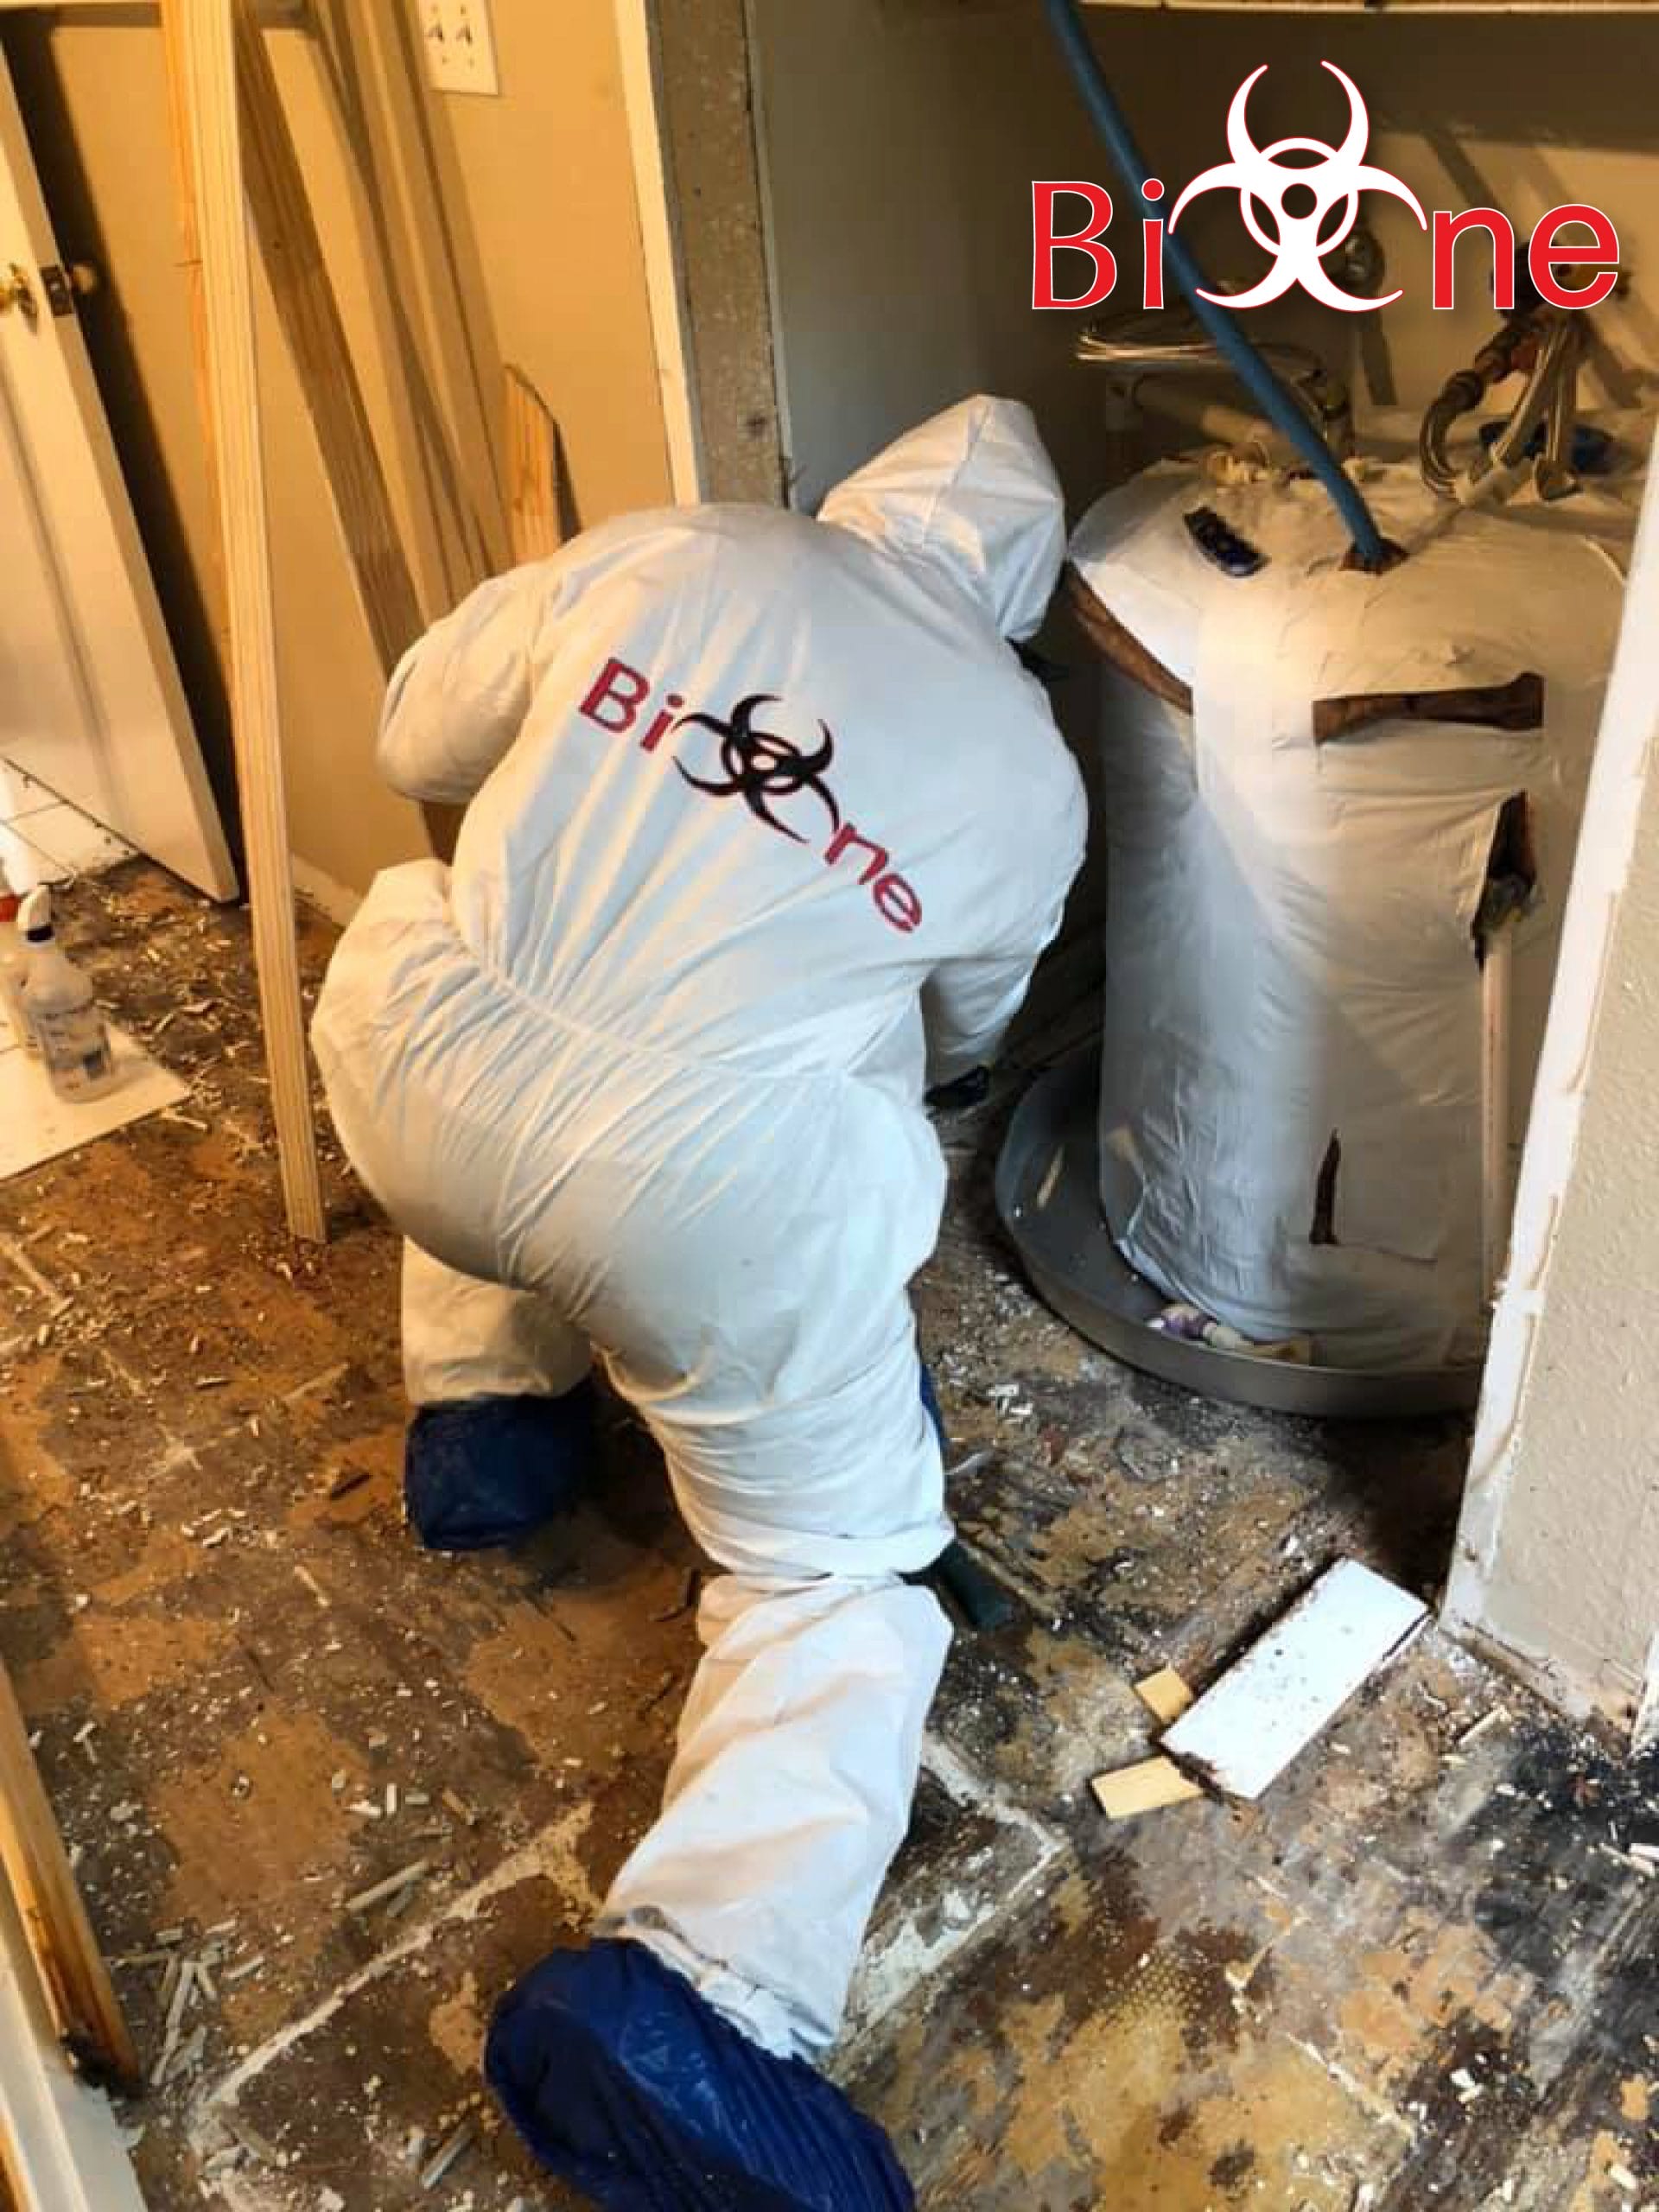 Bio-One certified technicians will thoroughly revise your house or property to clean and remediate damage from rodent droppings.